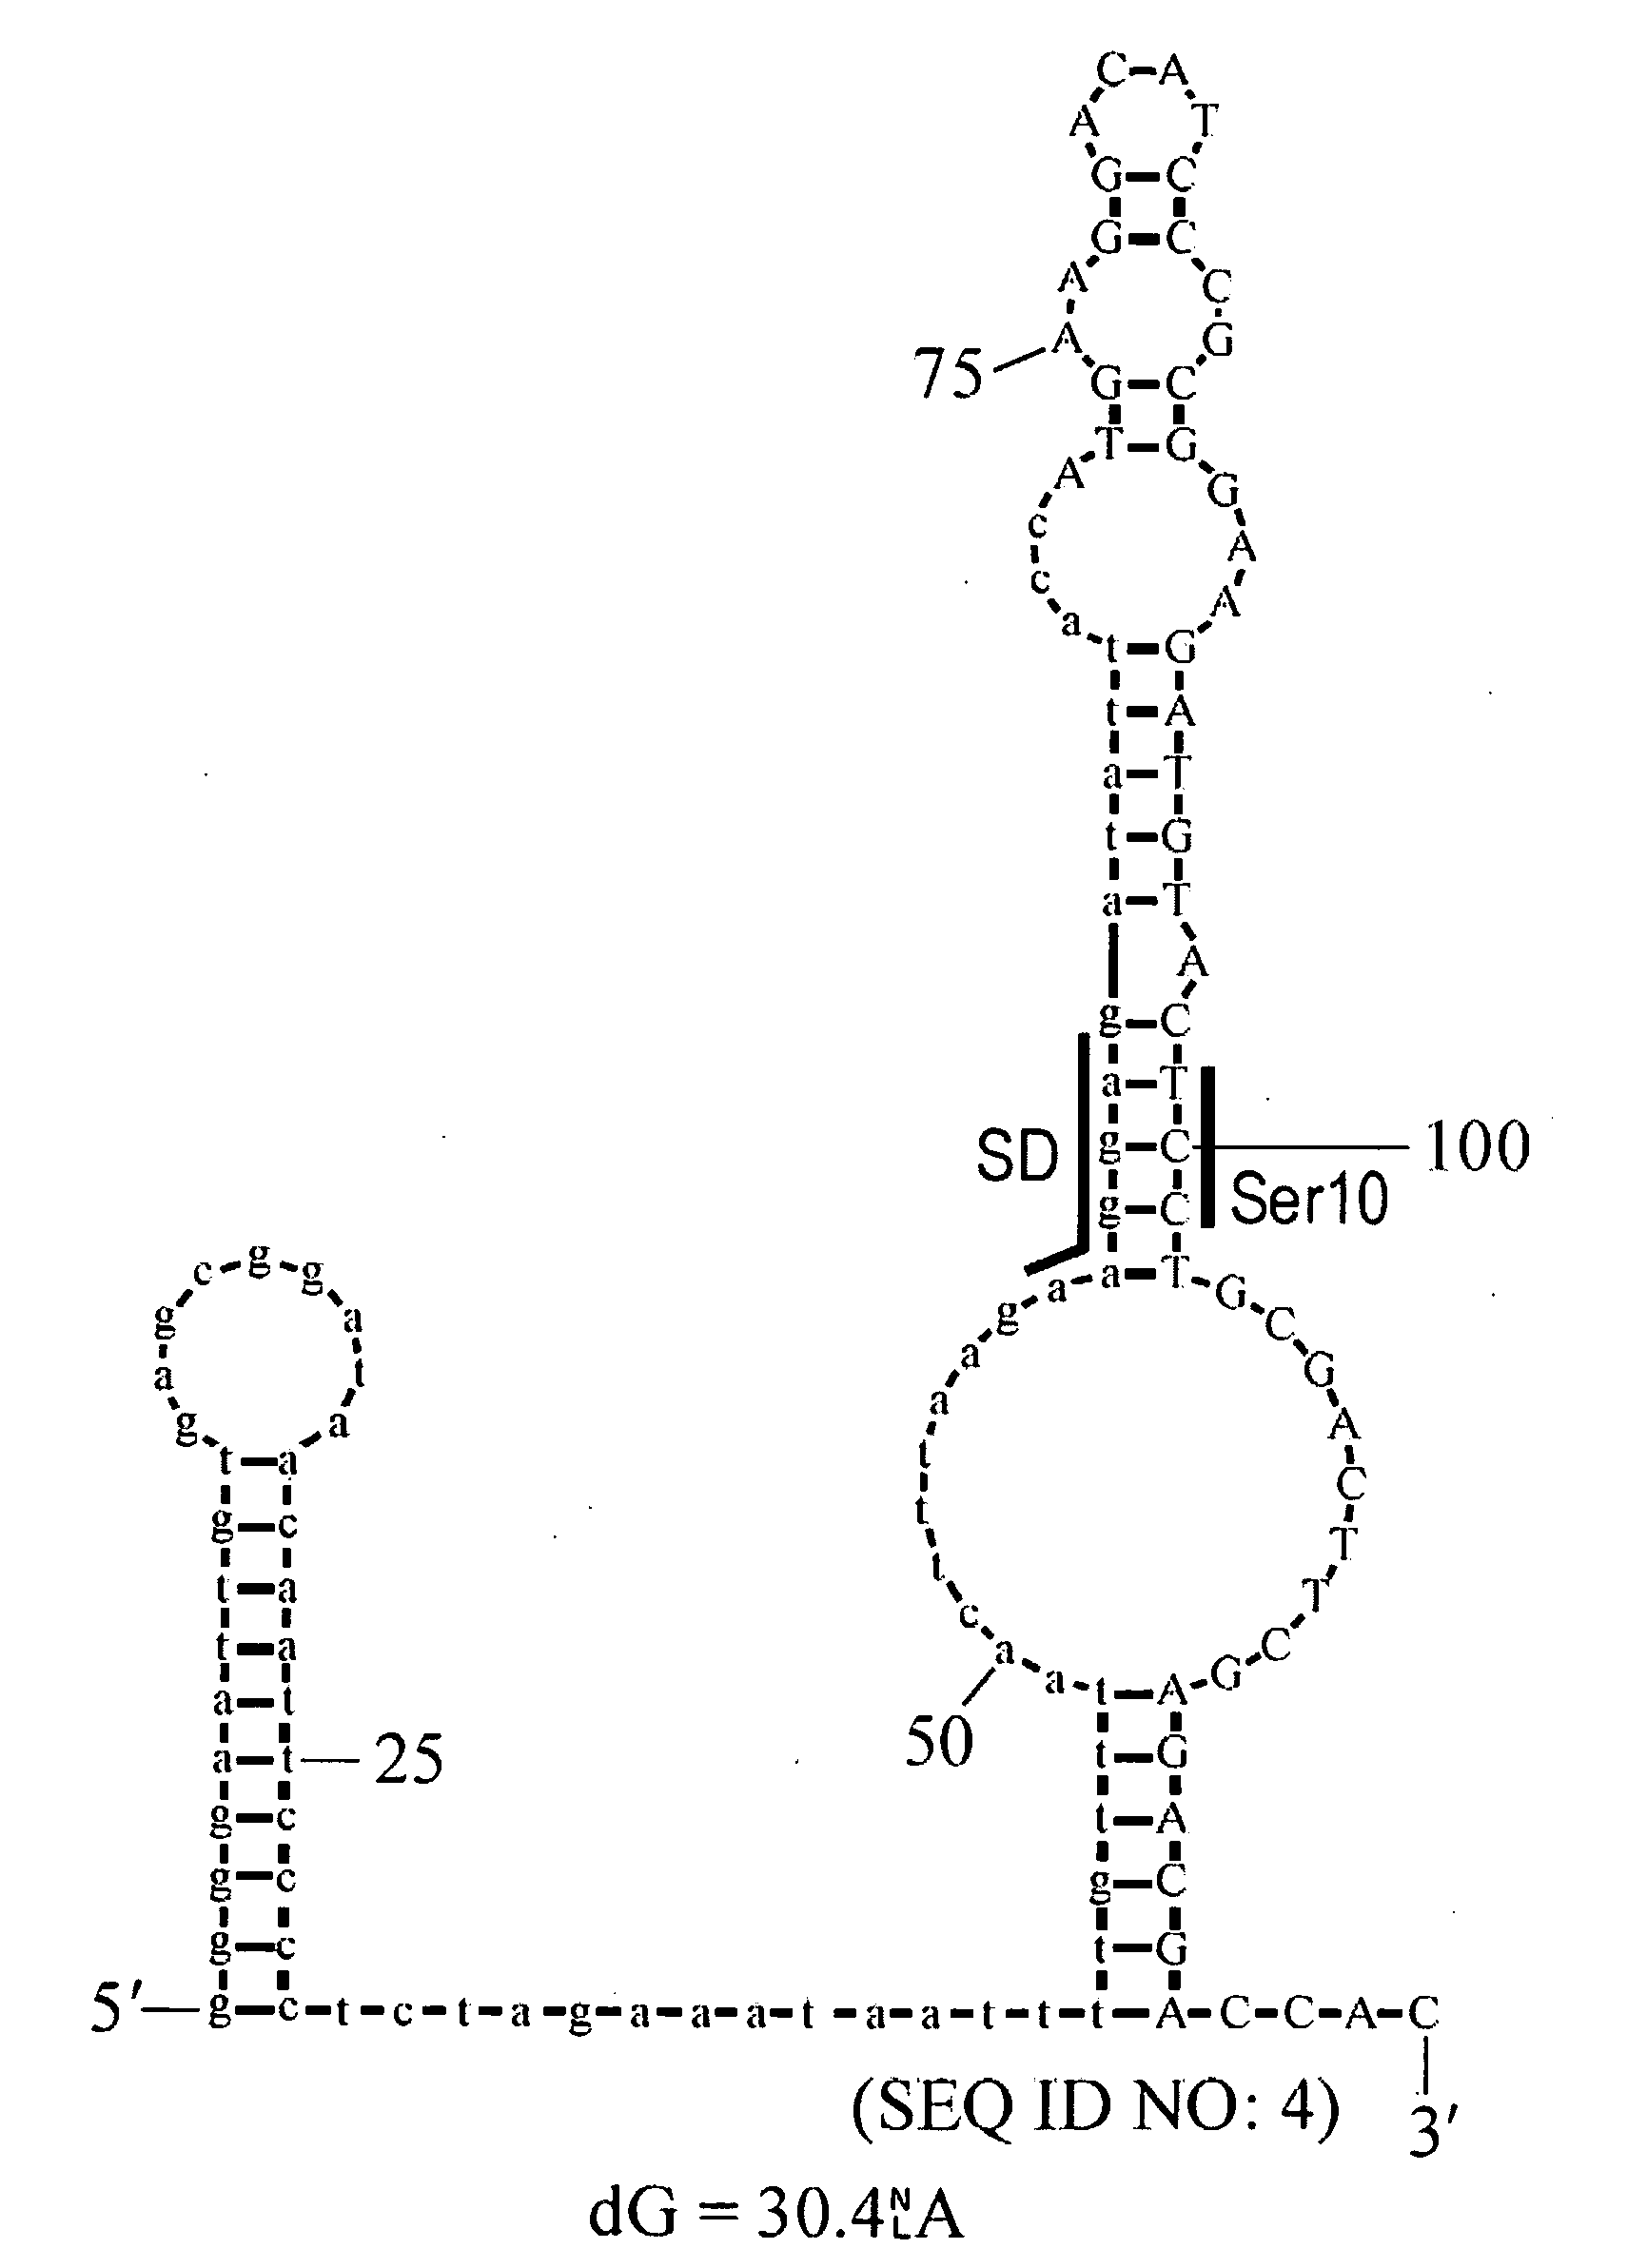 Design of synthetic nucleic acids for expression of encoded proteins